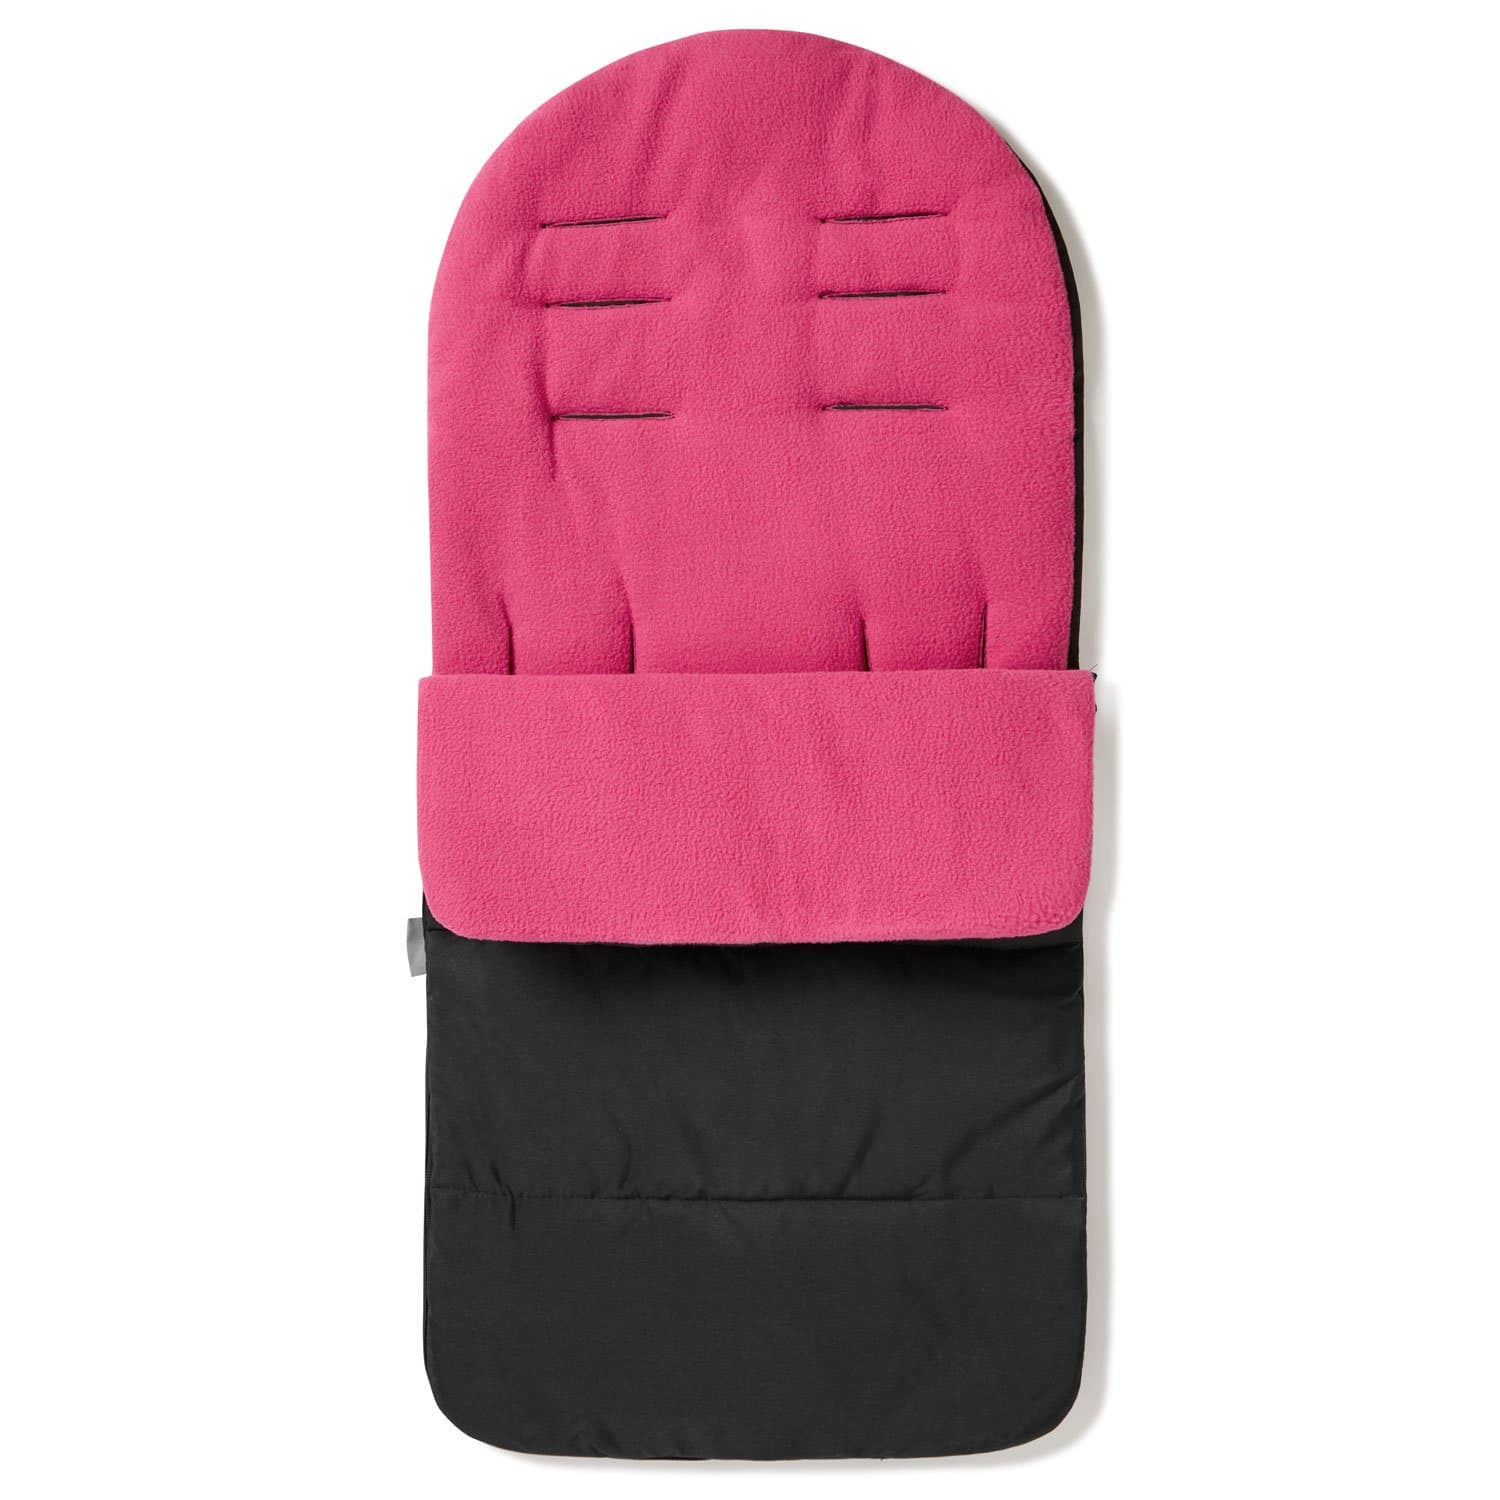 Premium Footmuff / Cosy Toes Compatible with BOB - Pink Rose / Fits All Models | For Your Little One